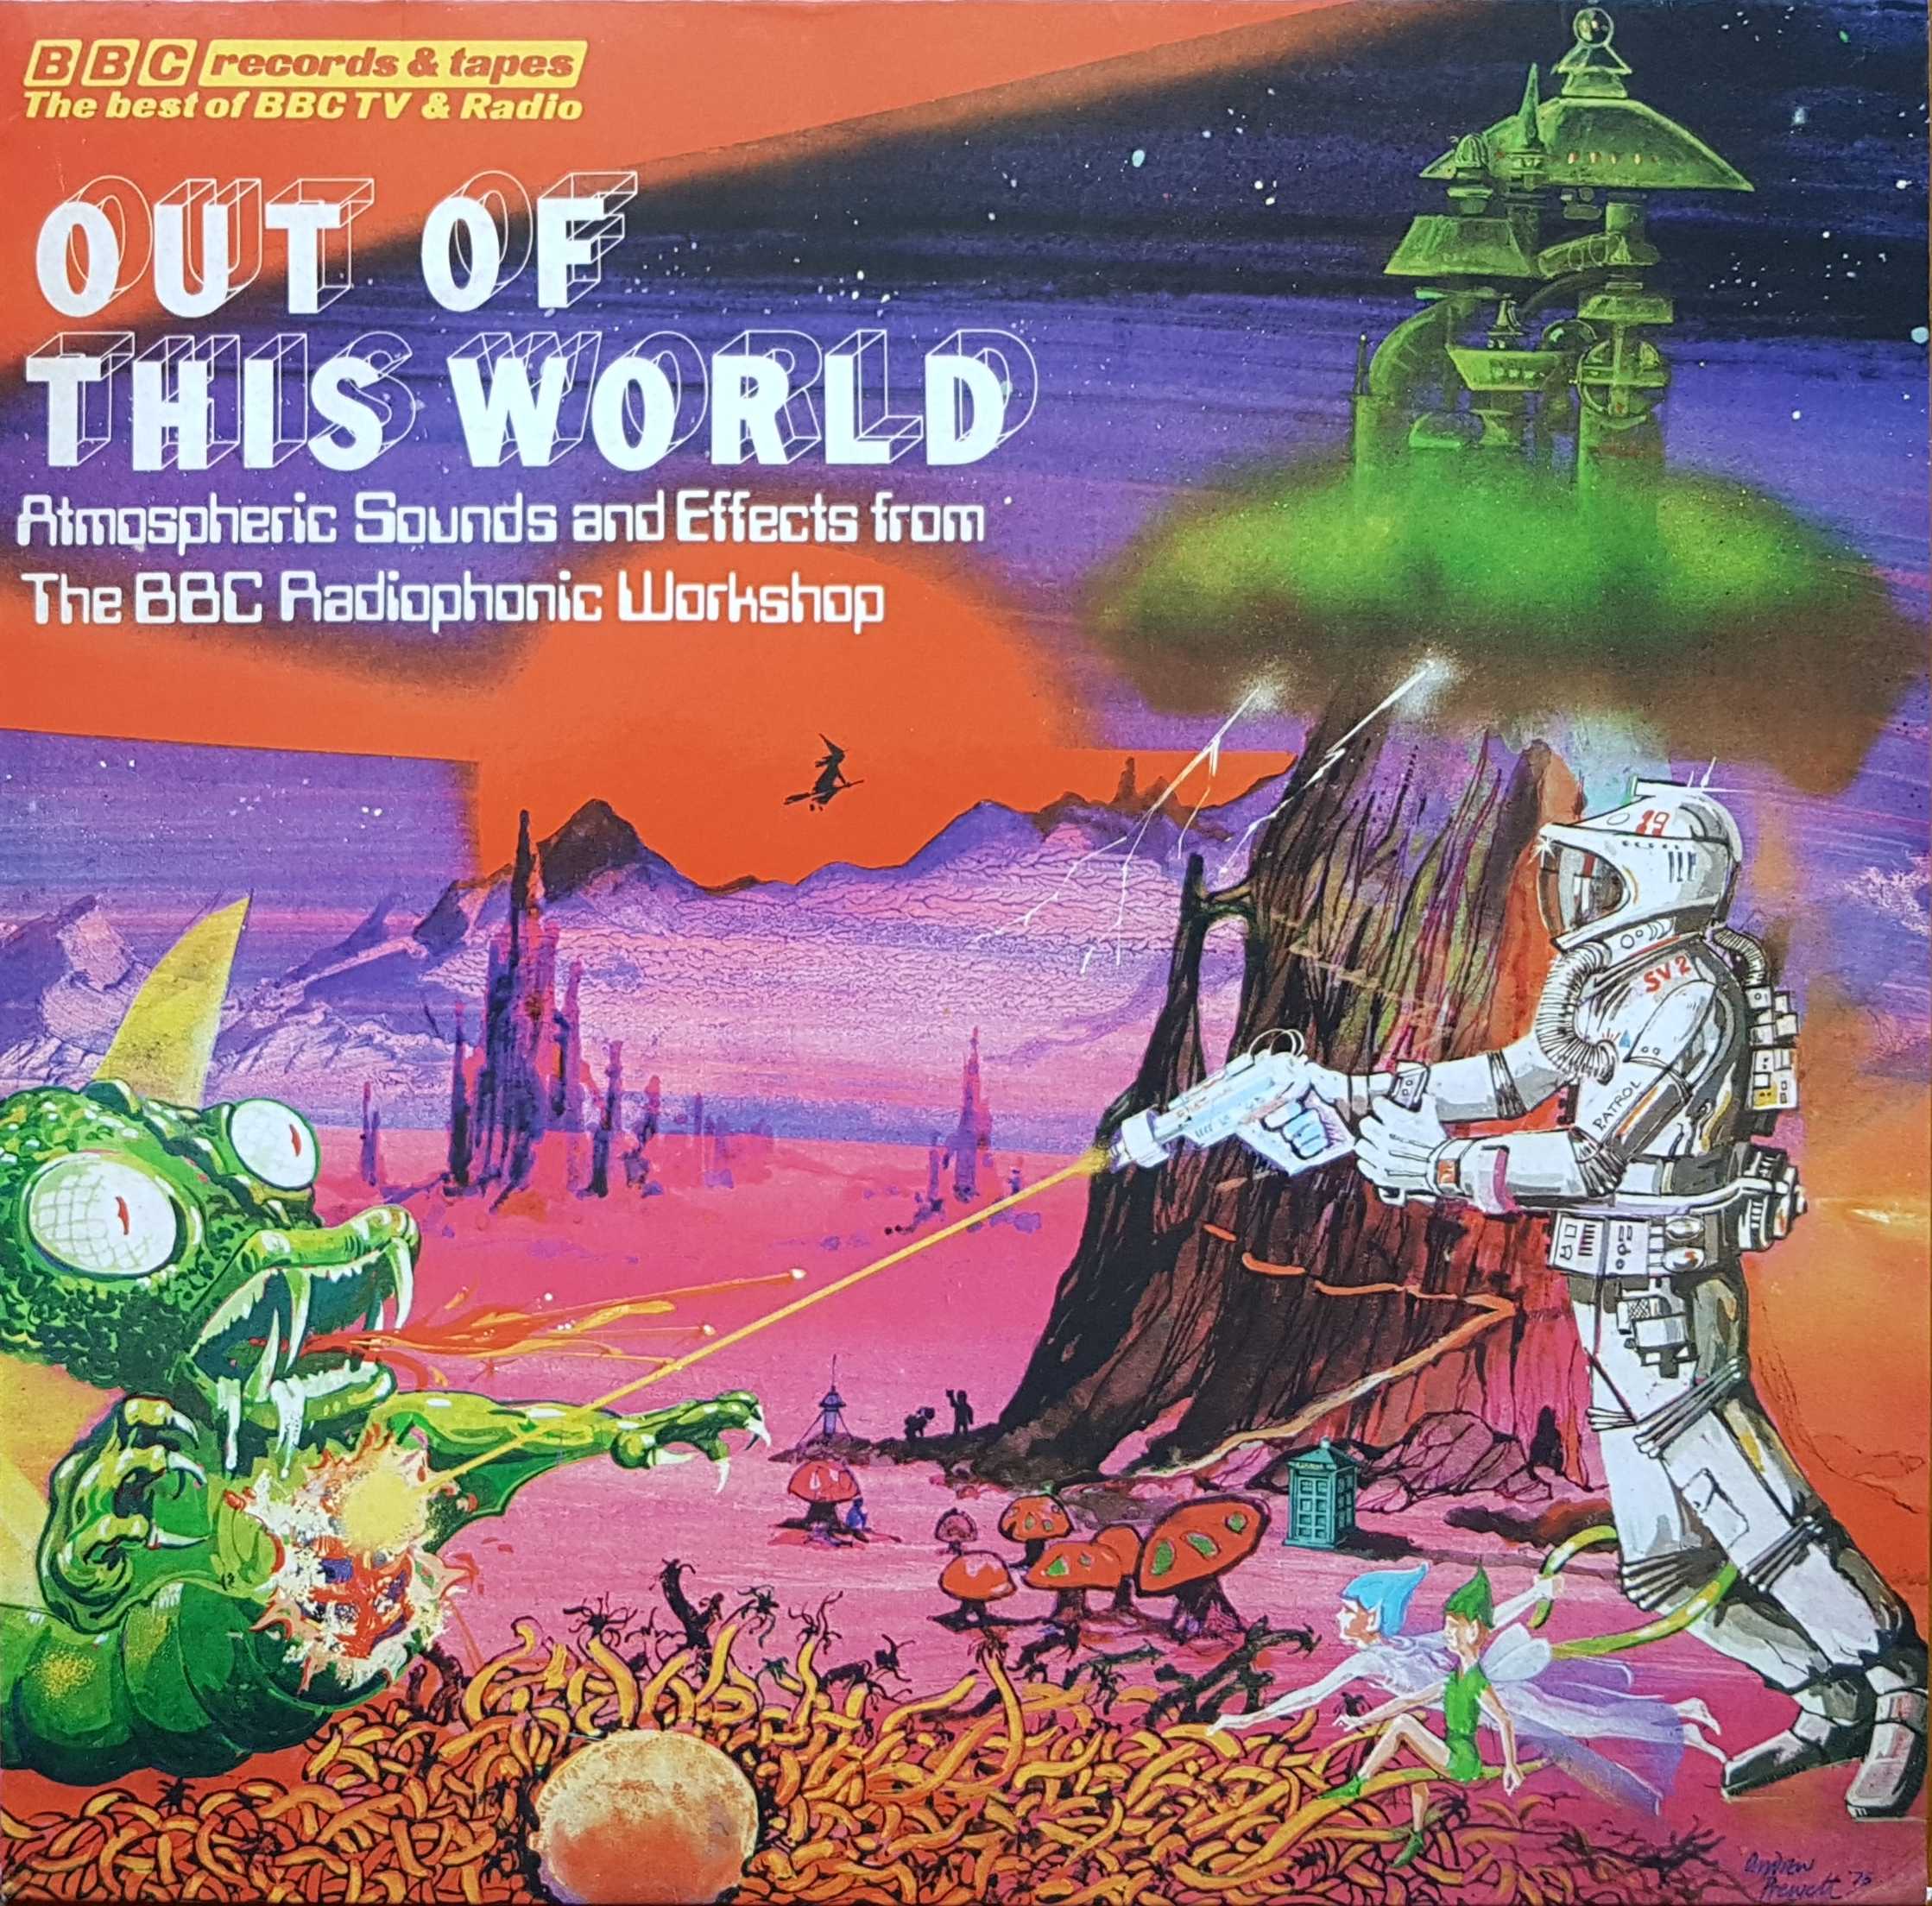 Picture of Out of this world - BBC sound effects by artist John Baker / David Cain / Malcolm Clarke / Delia Derbyshire / Brian Hodgson / Peter Howell / Glynis Jones / Paddy Kingsland / Roger Limb / Dick Mills / Richard Yeoman-Clark / BBC Radiophonic Workshop from the BBC albums - Records and Tapes library